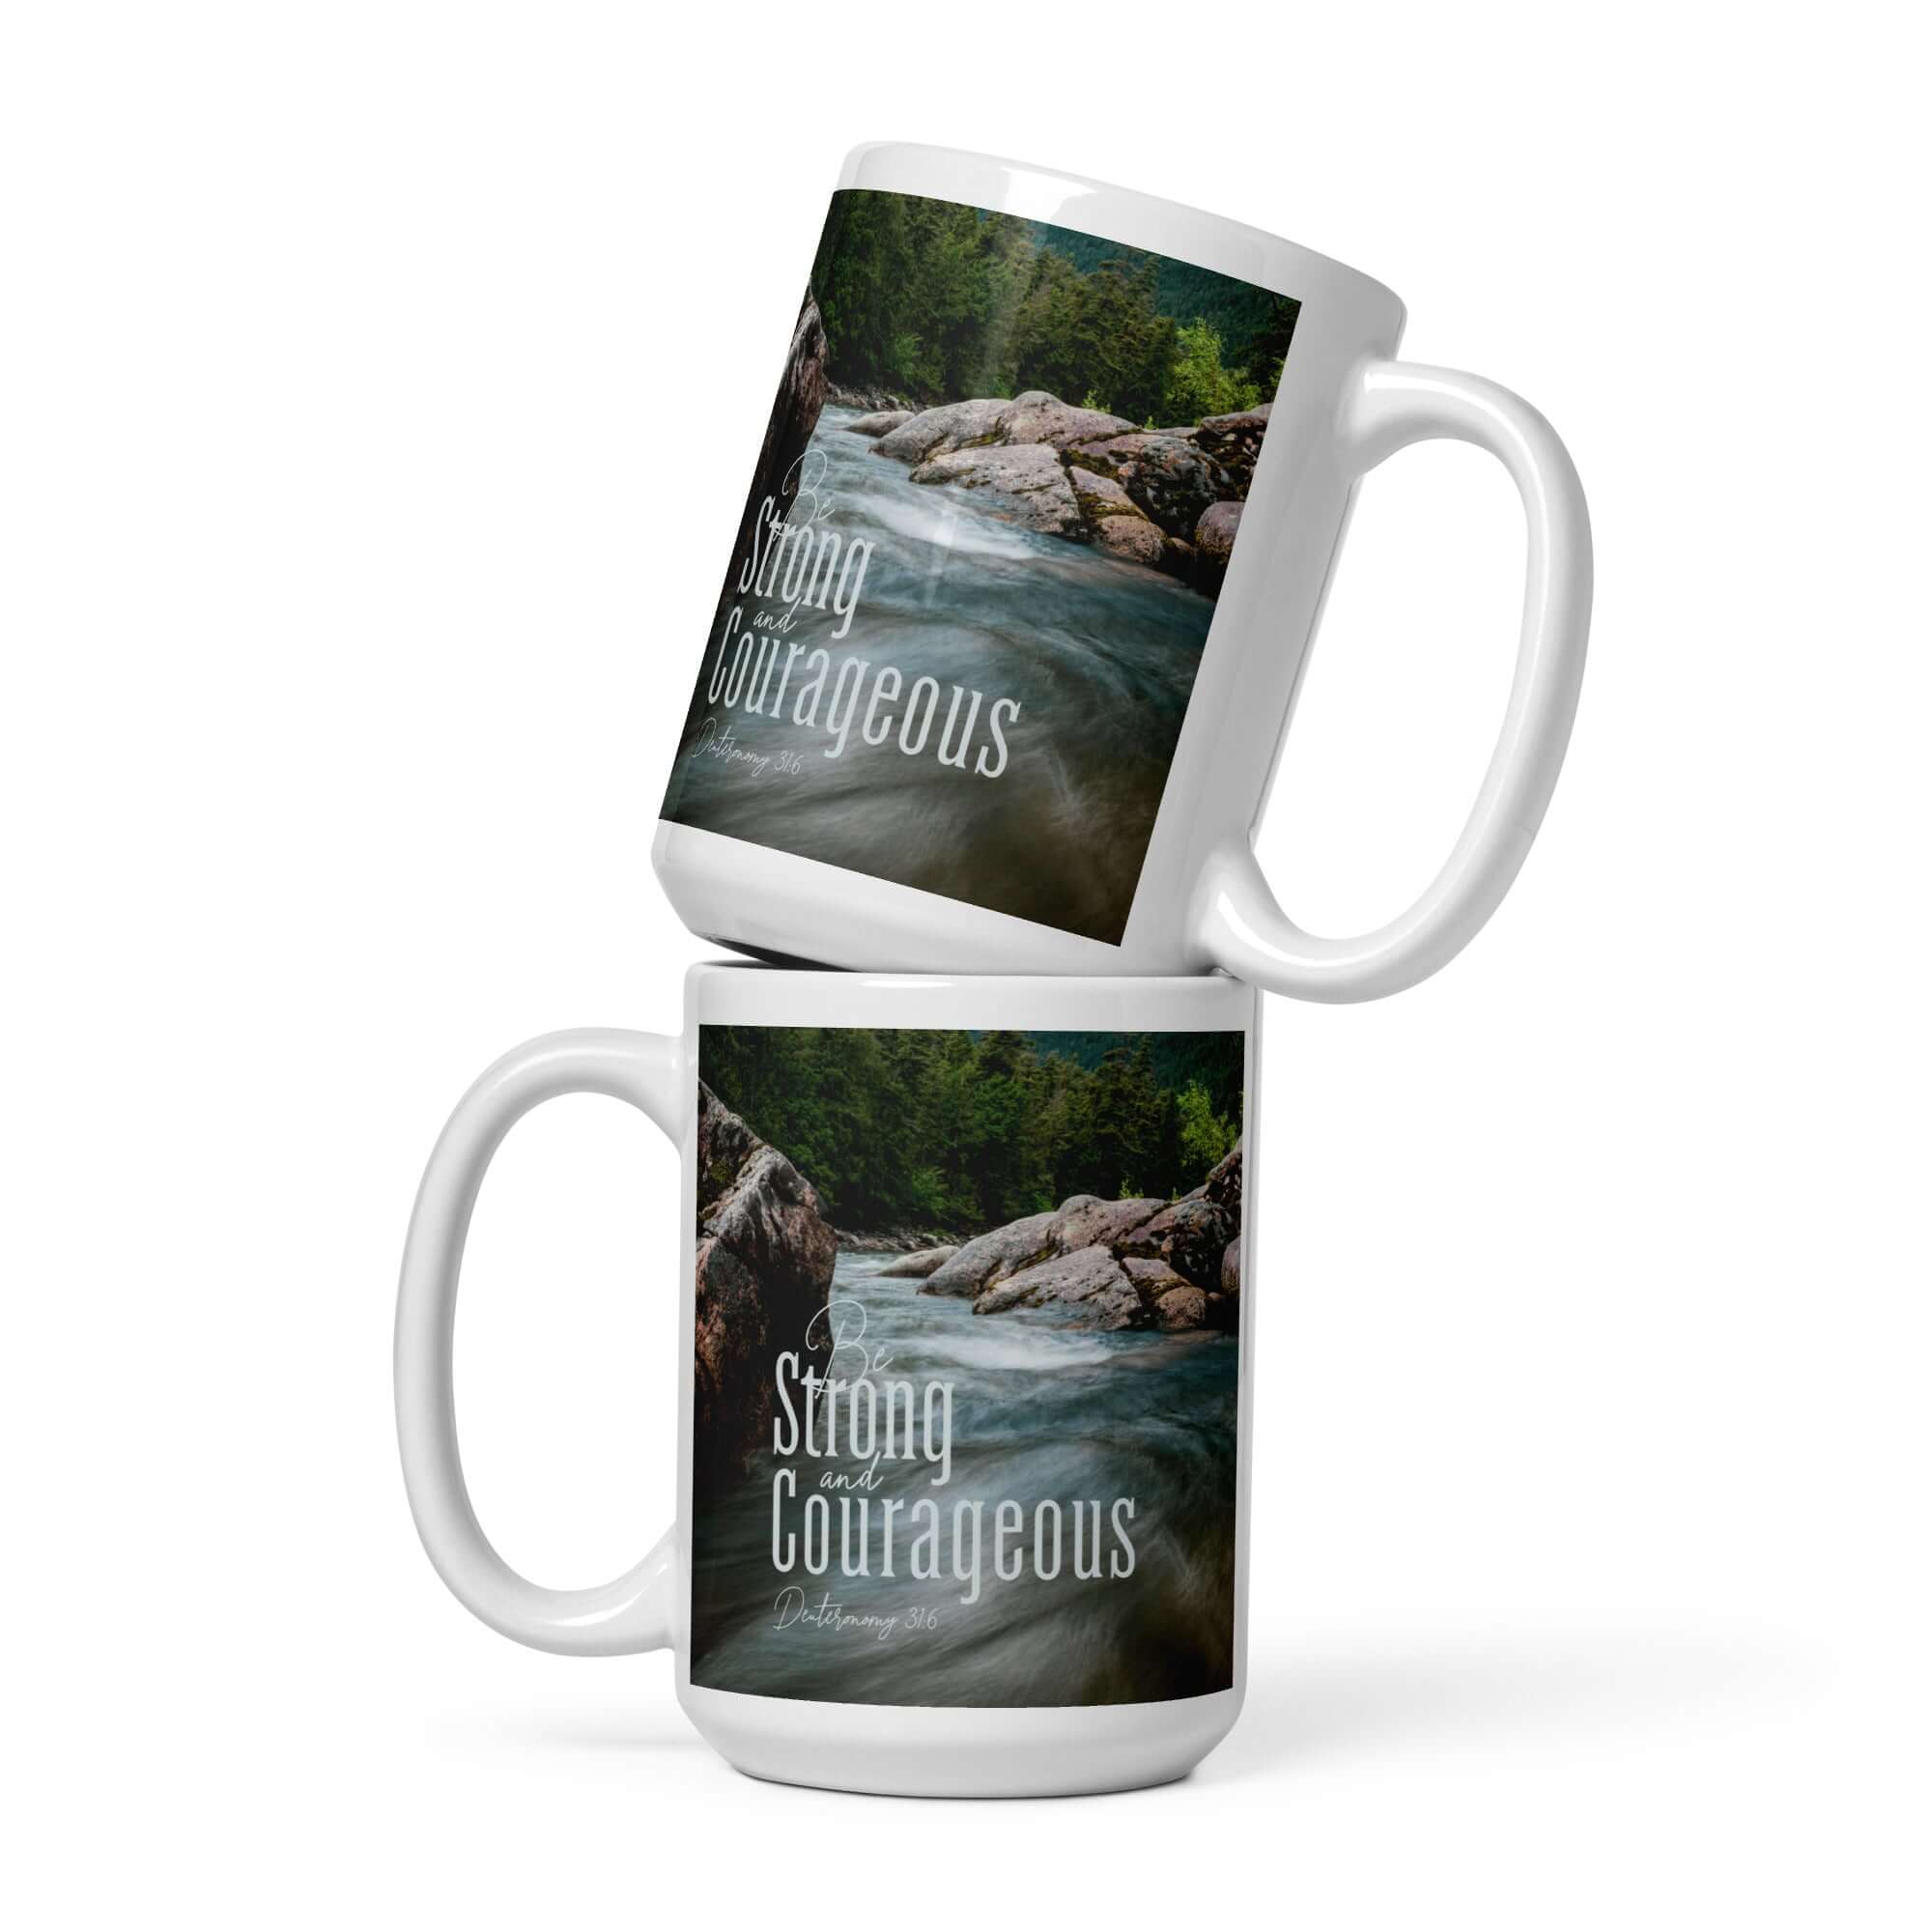 Deut 31:6 - Bible Verse, Be strong and courageous White Mug